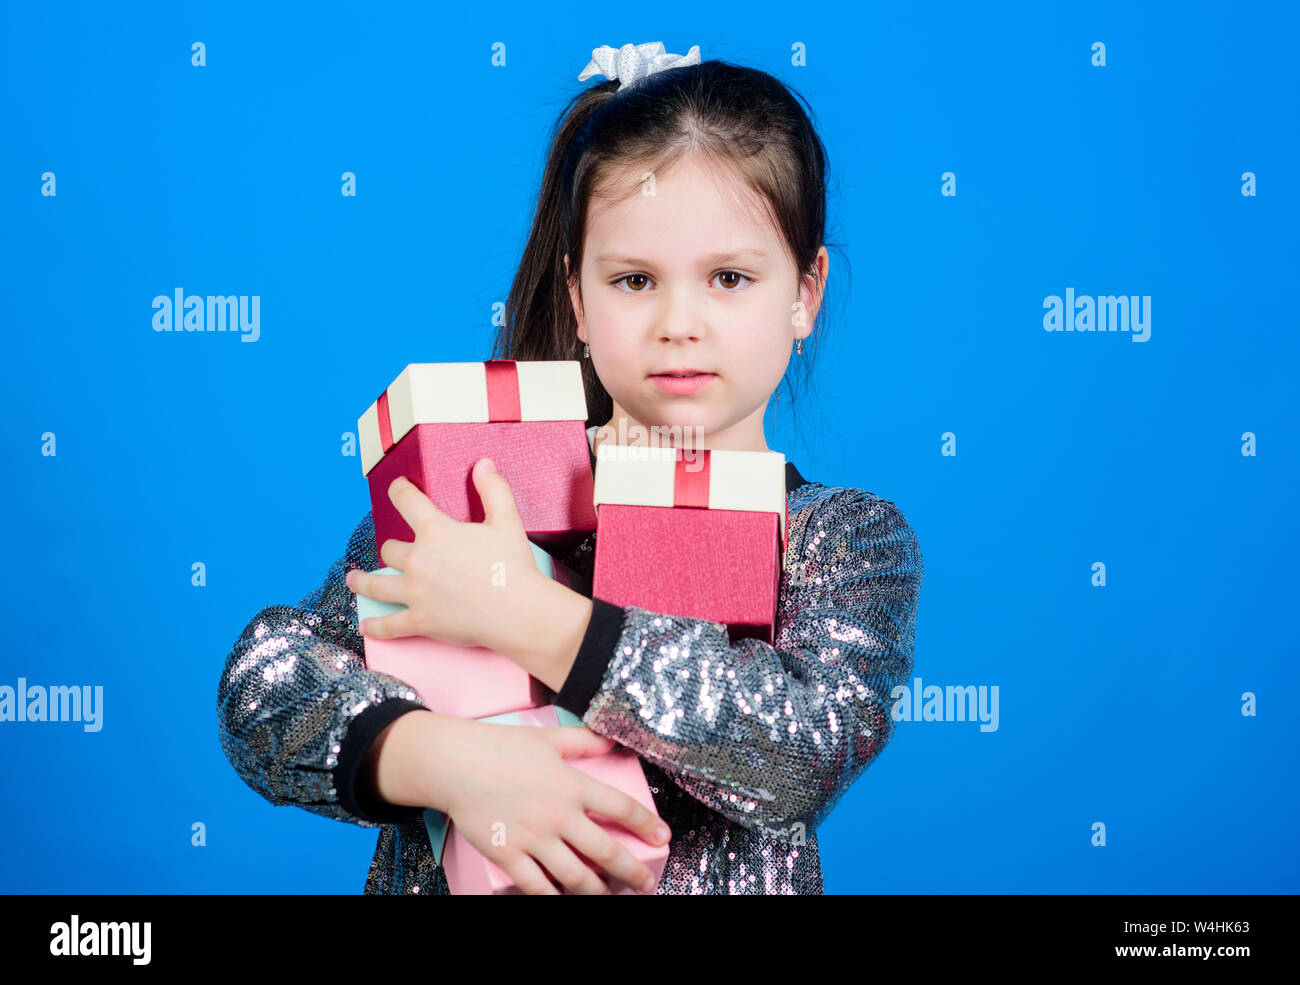 Special happens every day. Girl with gift boxes blue background. Black friday. Shopping day. Child carry lot gift boxes. Surprise gift box. Birthday wish list. World of happiness. Only for me. Stock Photo